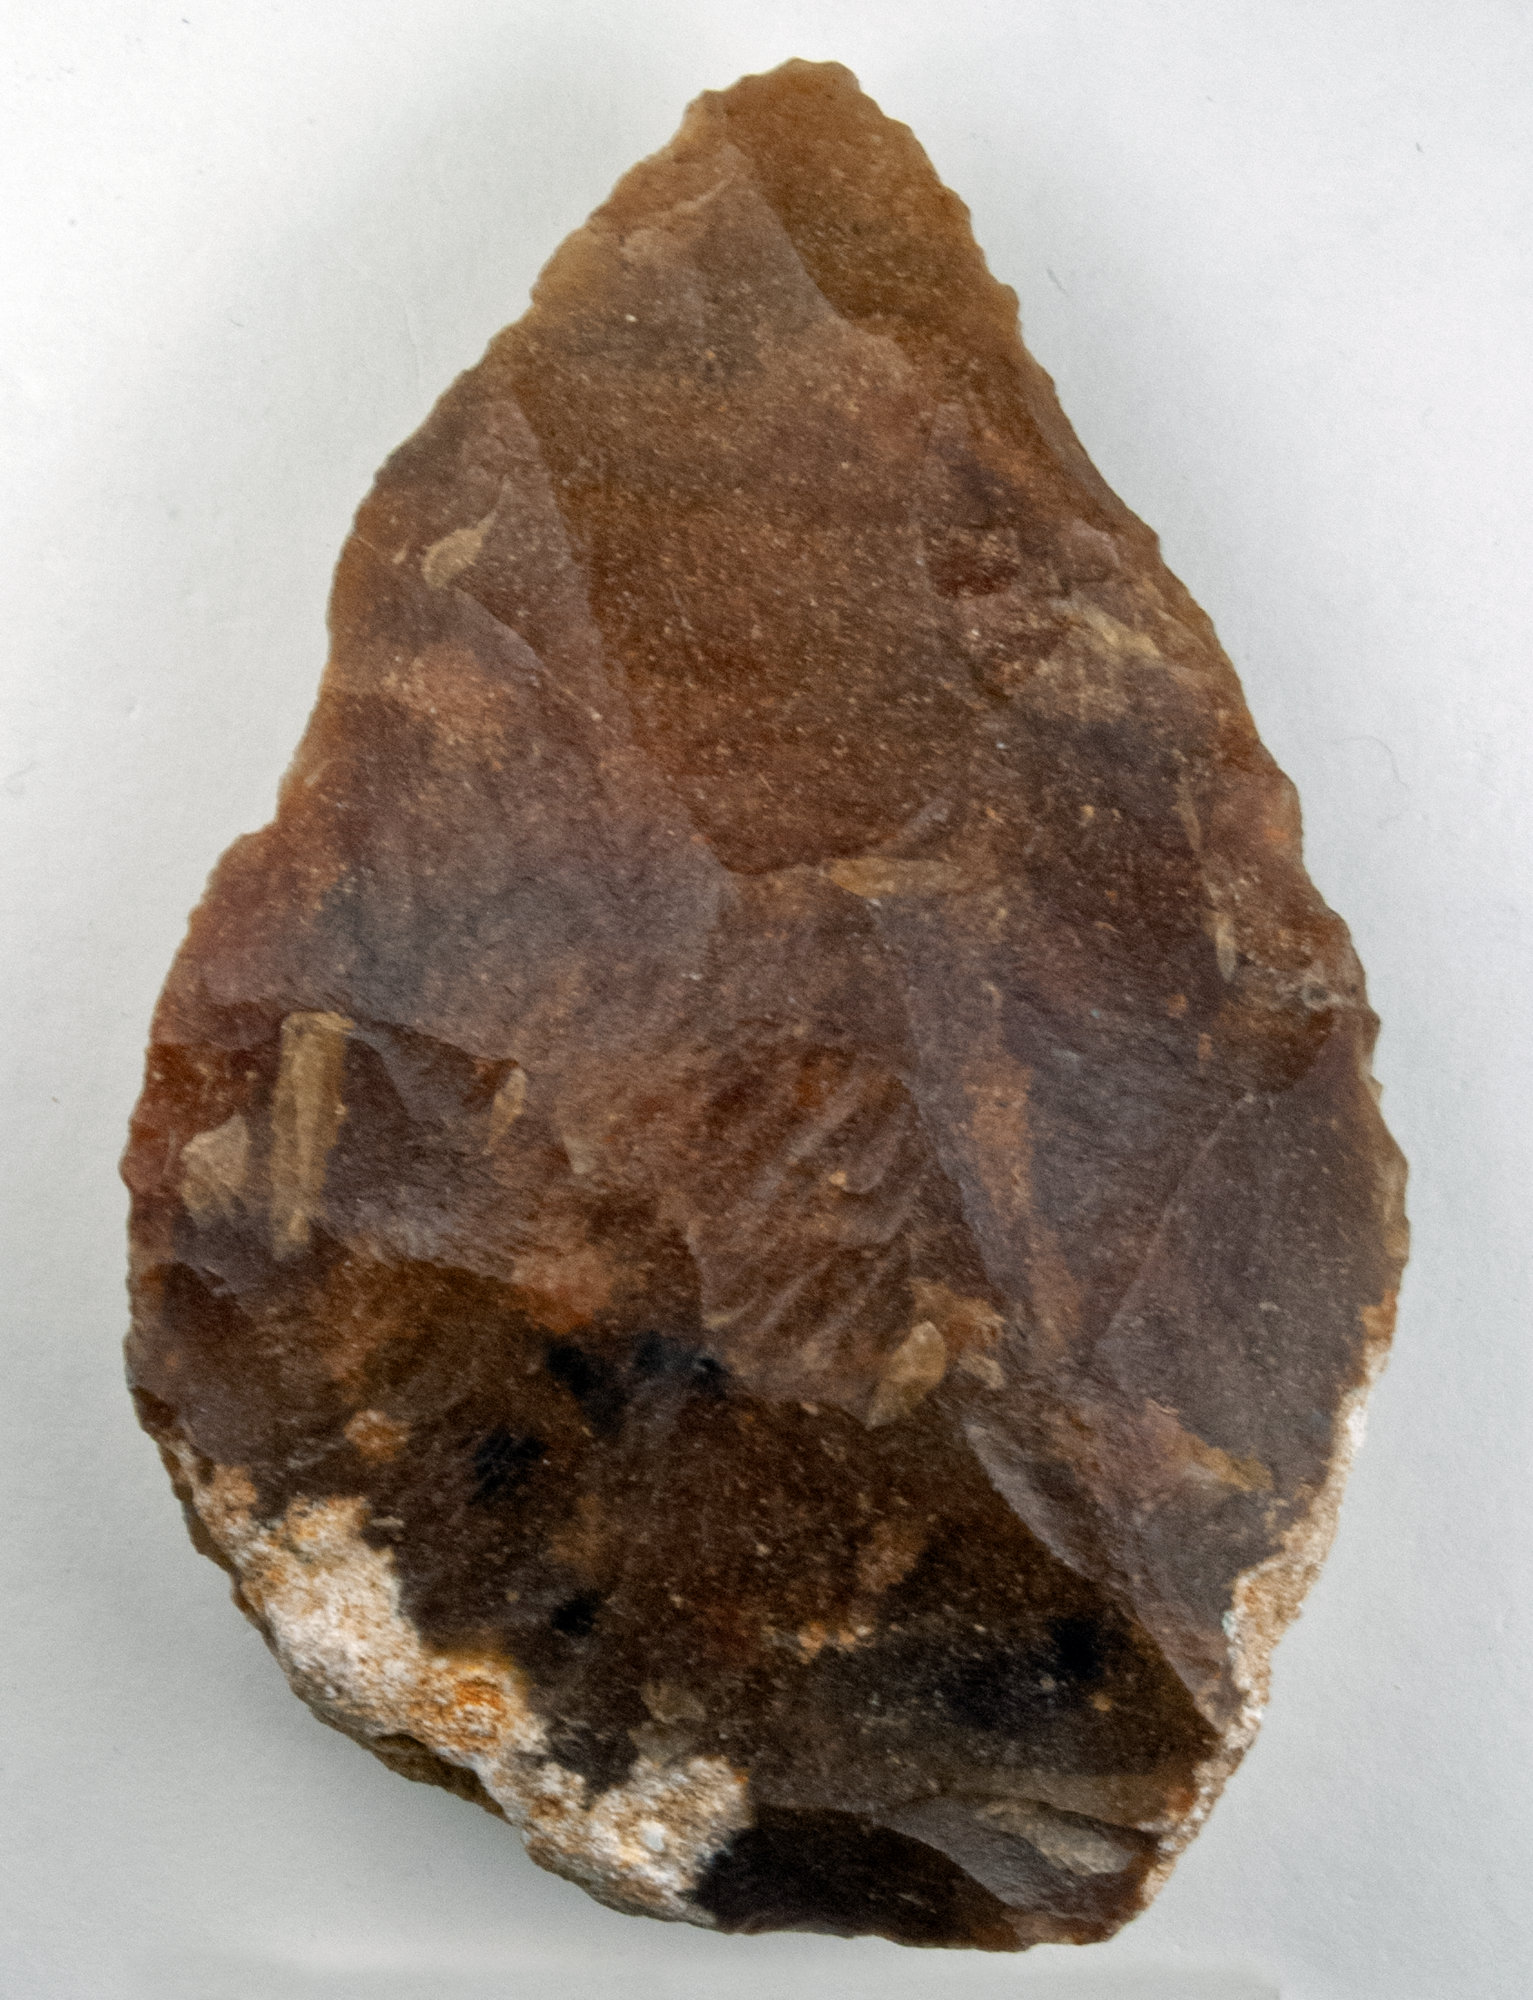 For a Handaxe: On the Basis of Longevity and Invention by Jacob Sam-La Rose